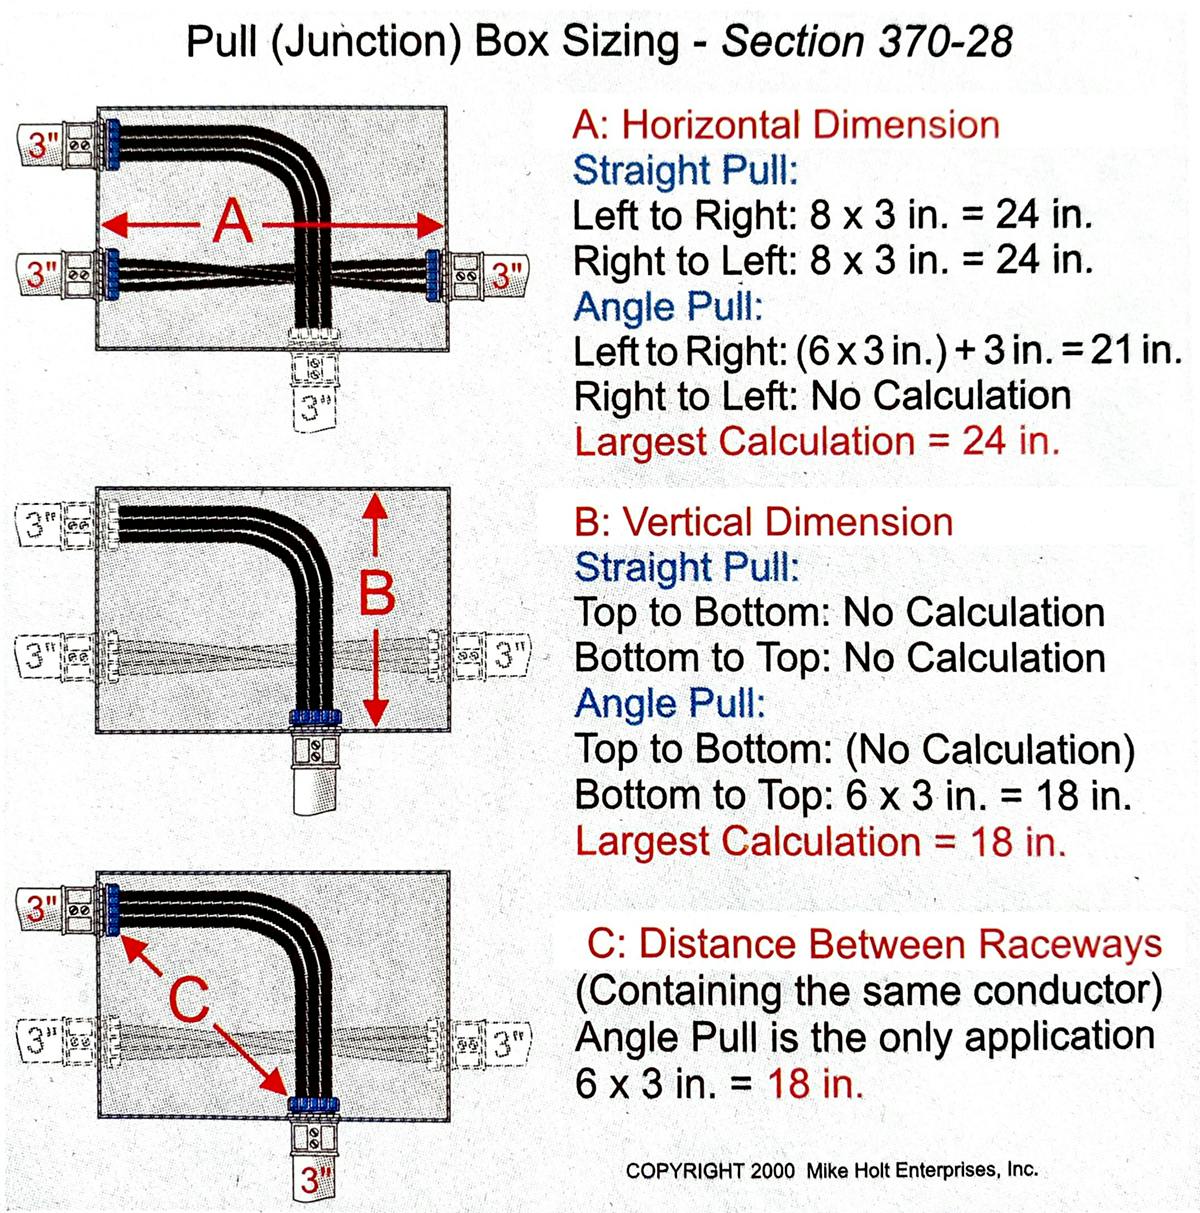 Fig. 4. To properly size this junction box, you must perform multiple calculations.